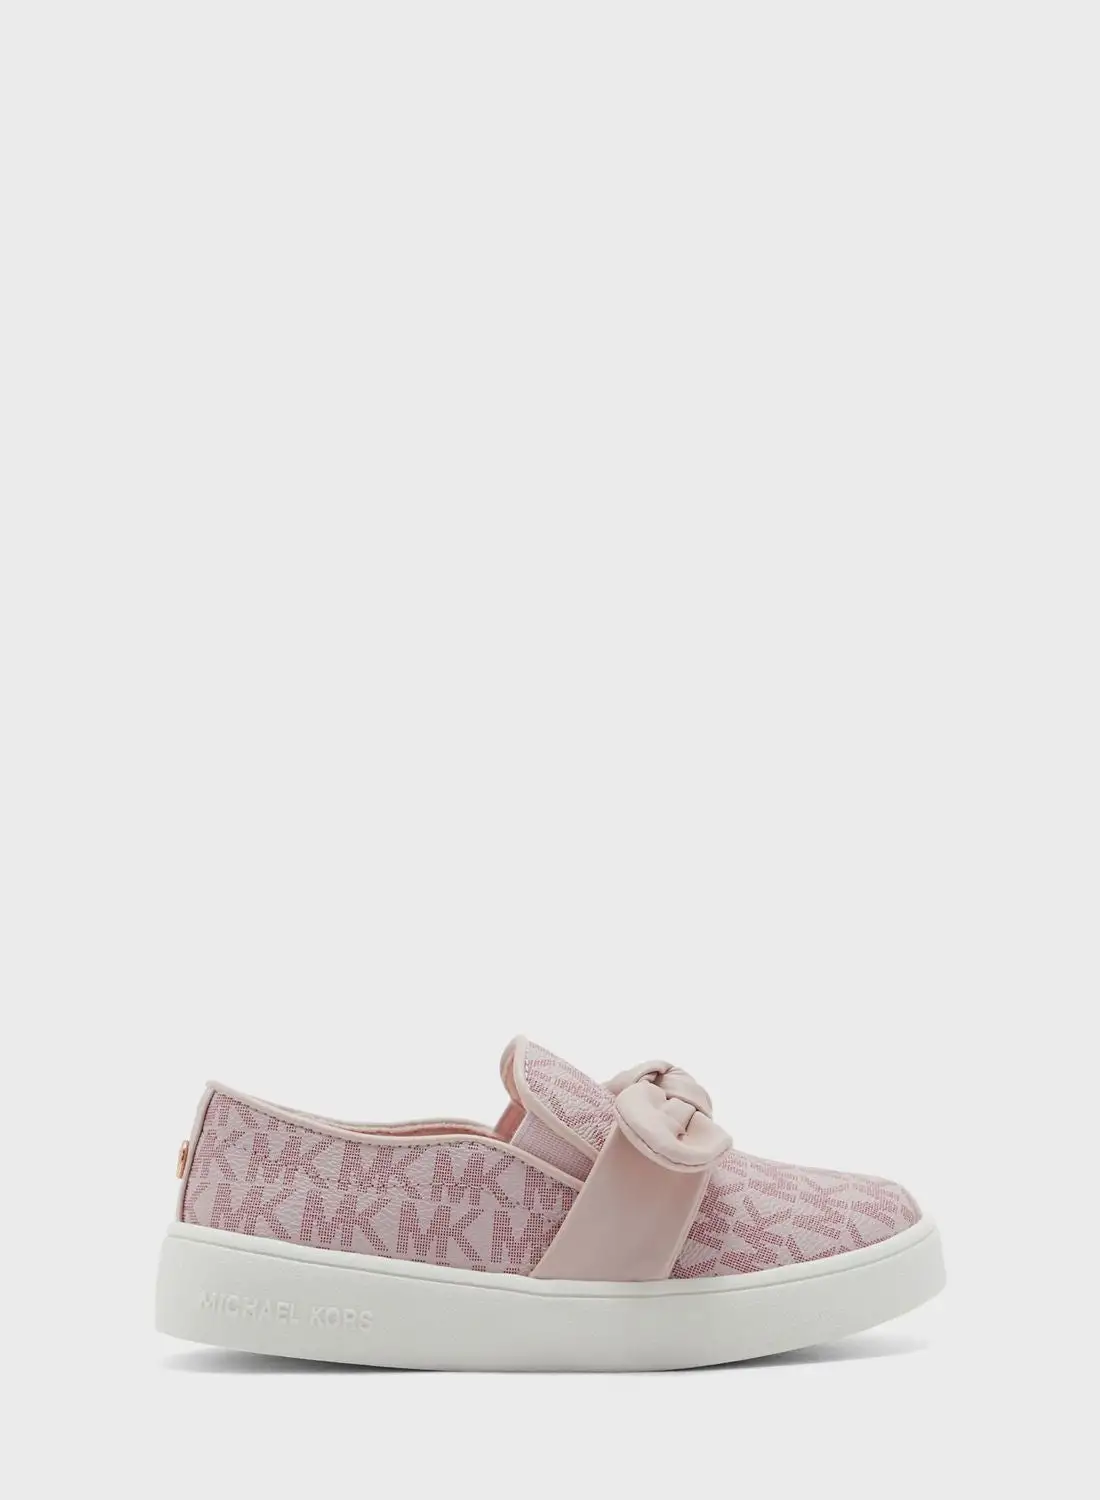 Michael Kors Youth Jem Bow Low Top Slip On Sneakers